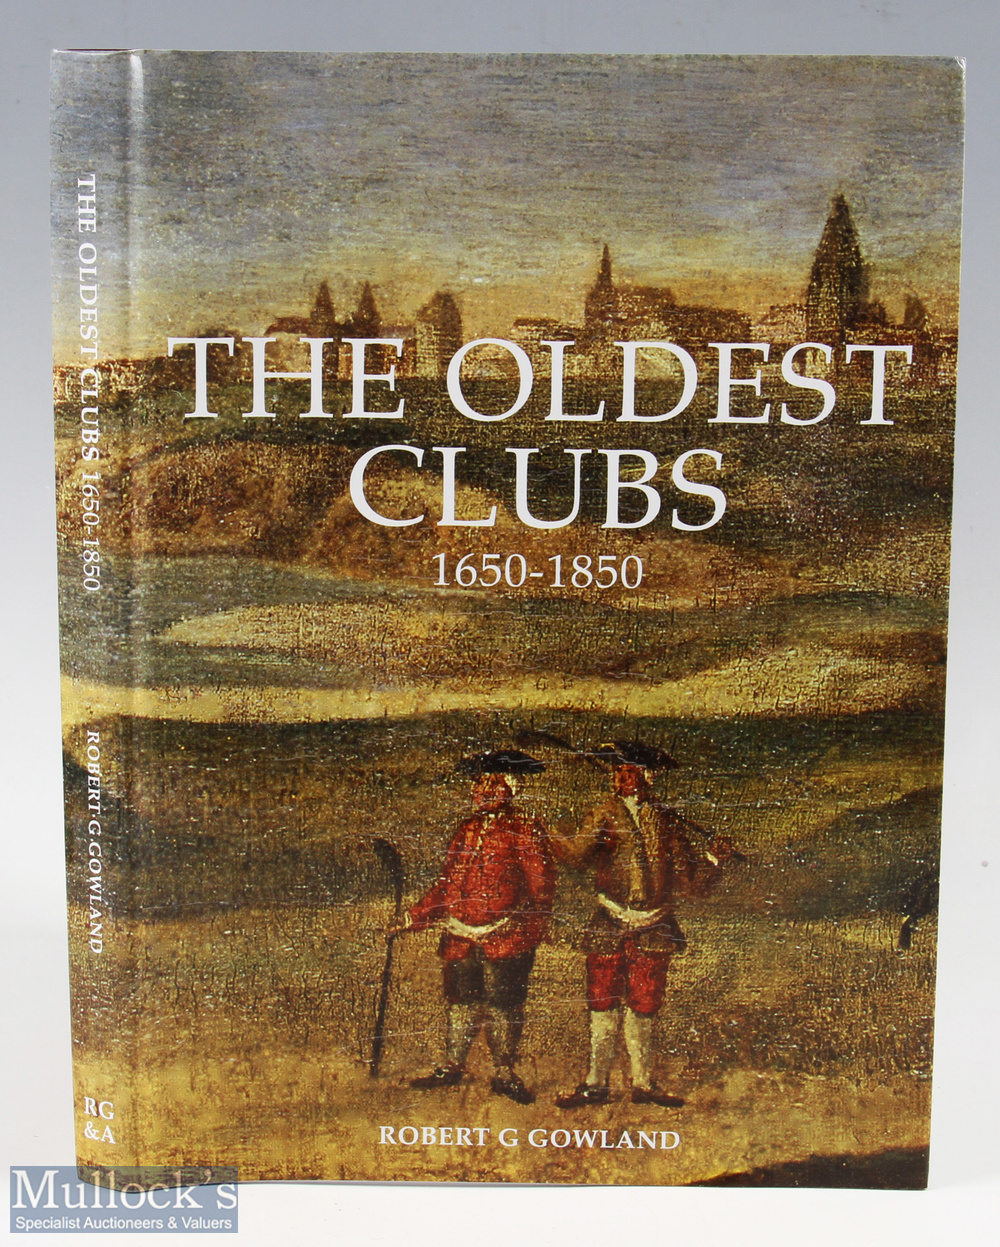 Robert G Gowland signed - "The Oldest Clubs 1650-1850" publ'd 2011 and signed by the author to the